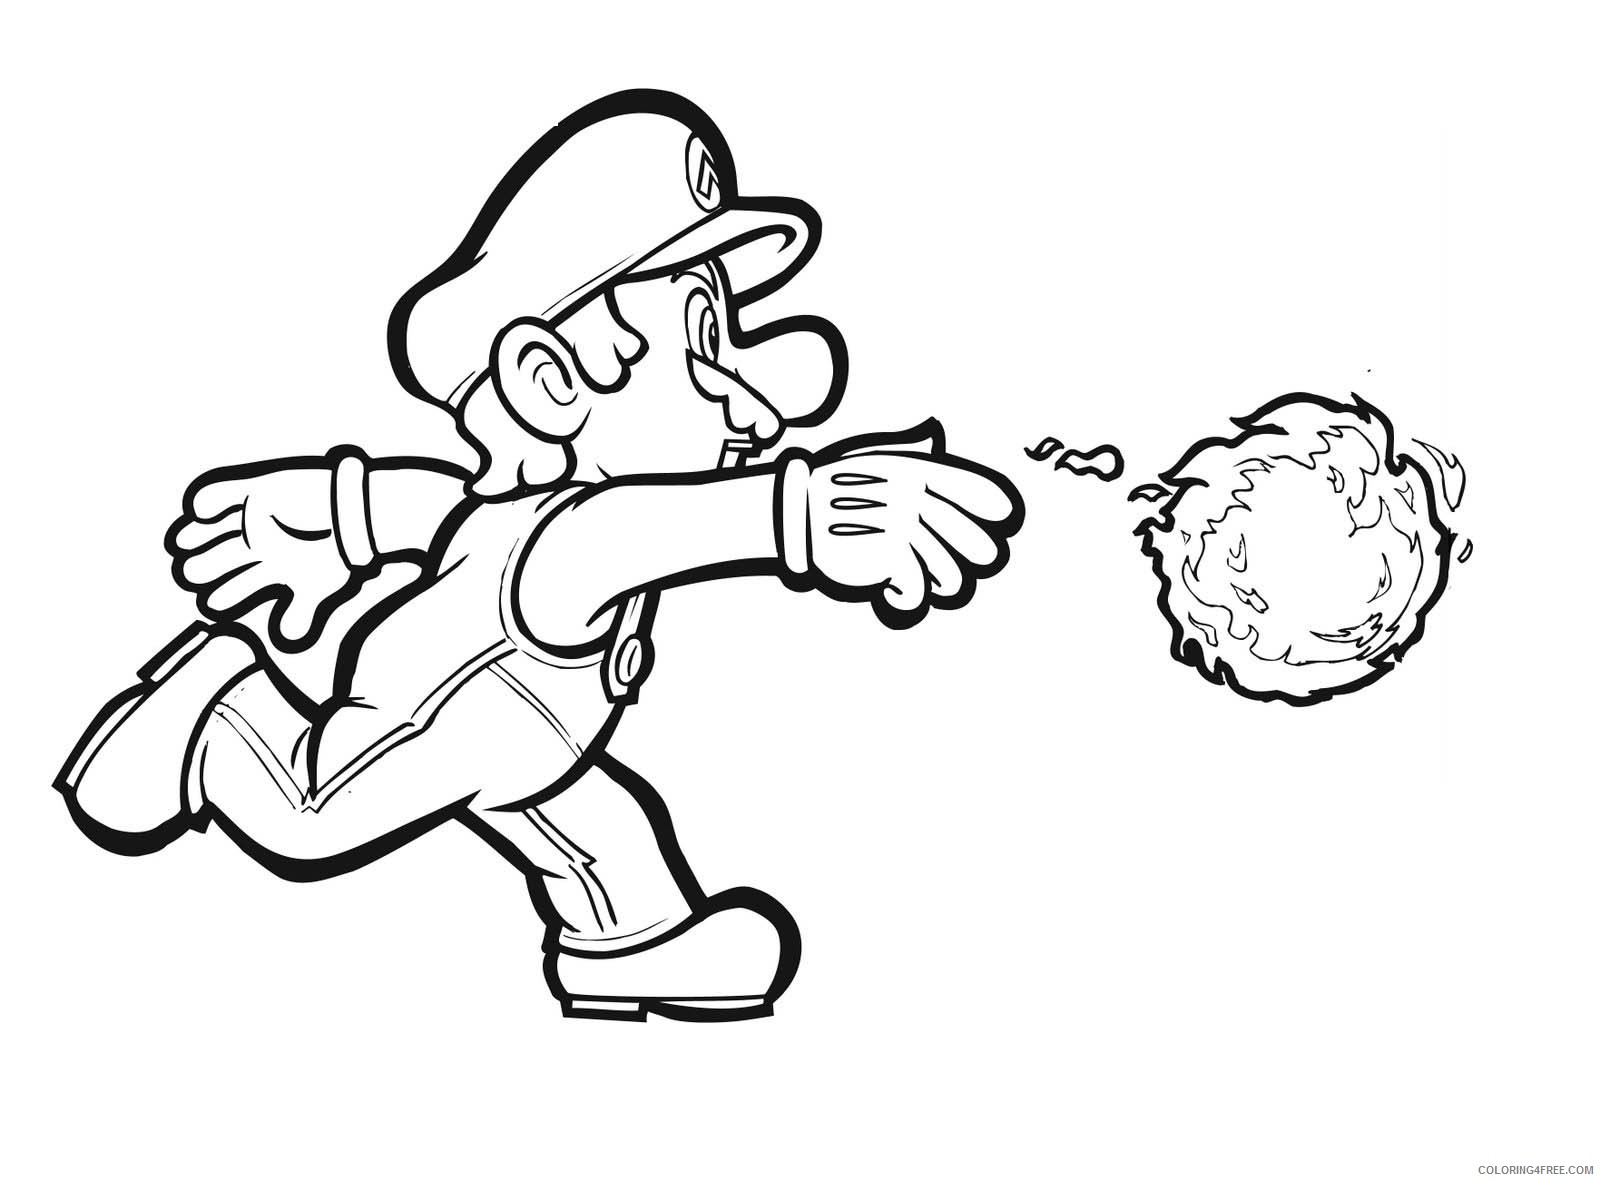 mario coloring pages throwing fireball Coloring4free